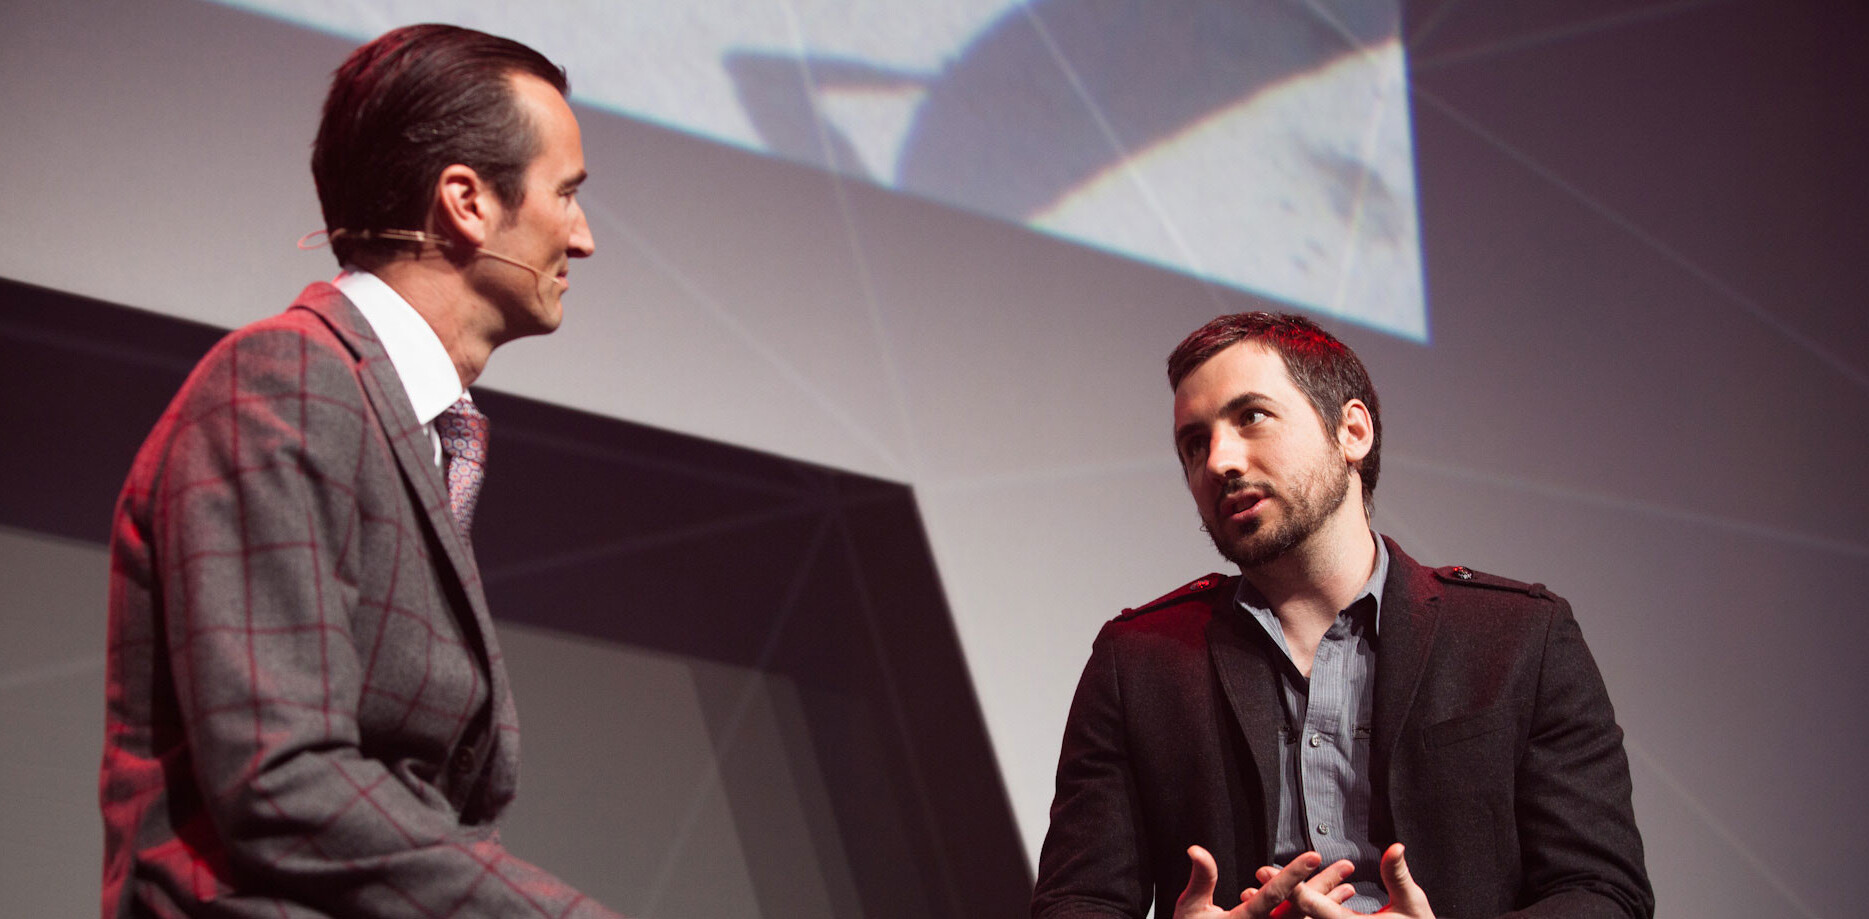 Kevin Rose wants to launch another startup, wishes he had stayed CEO of Digg